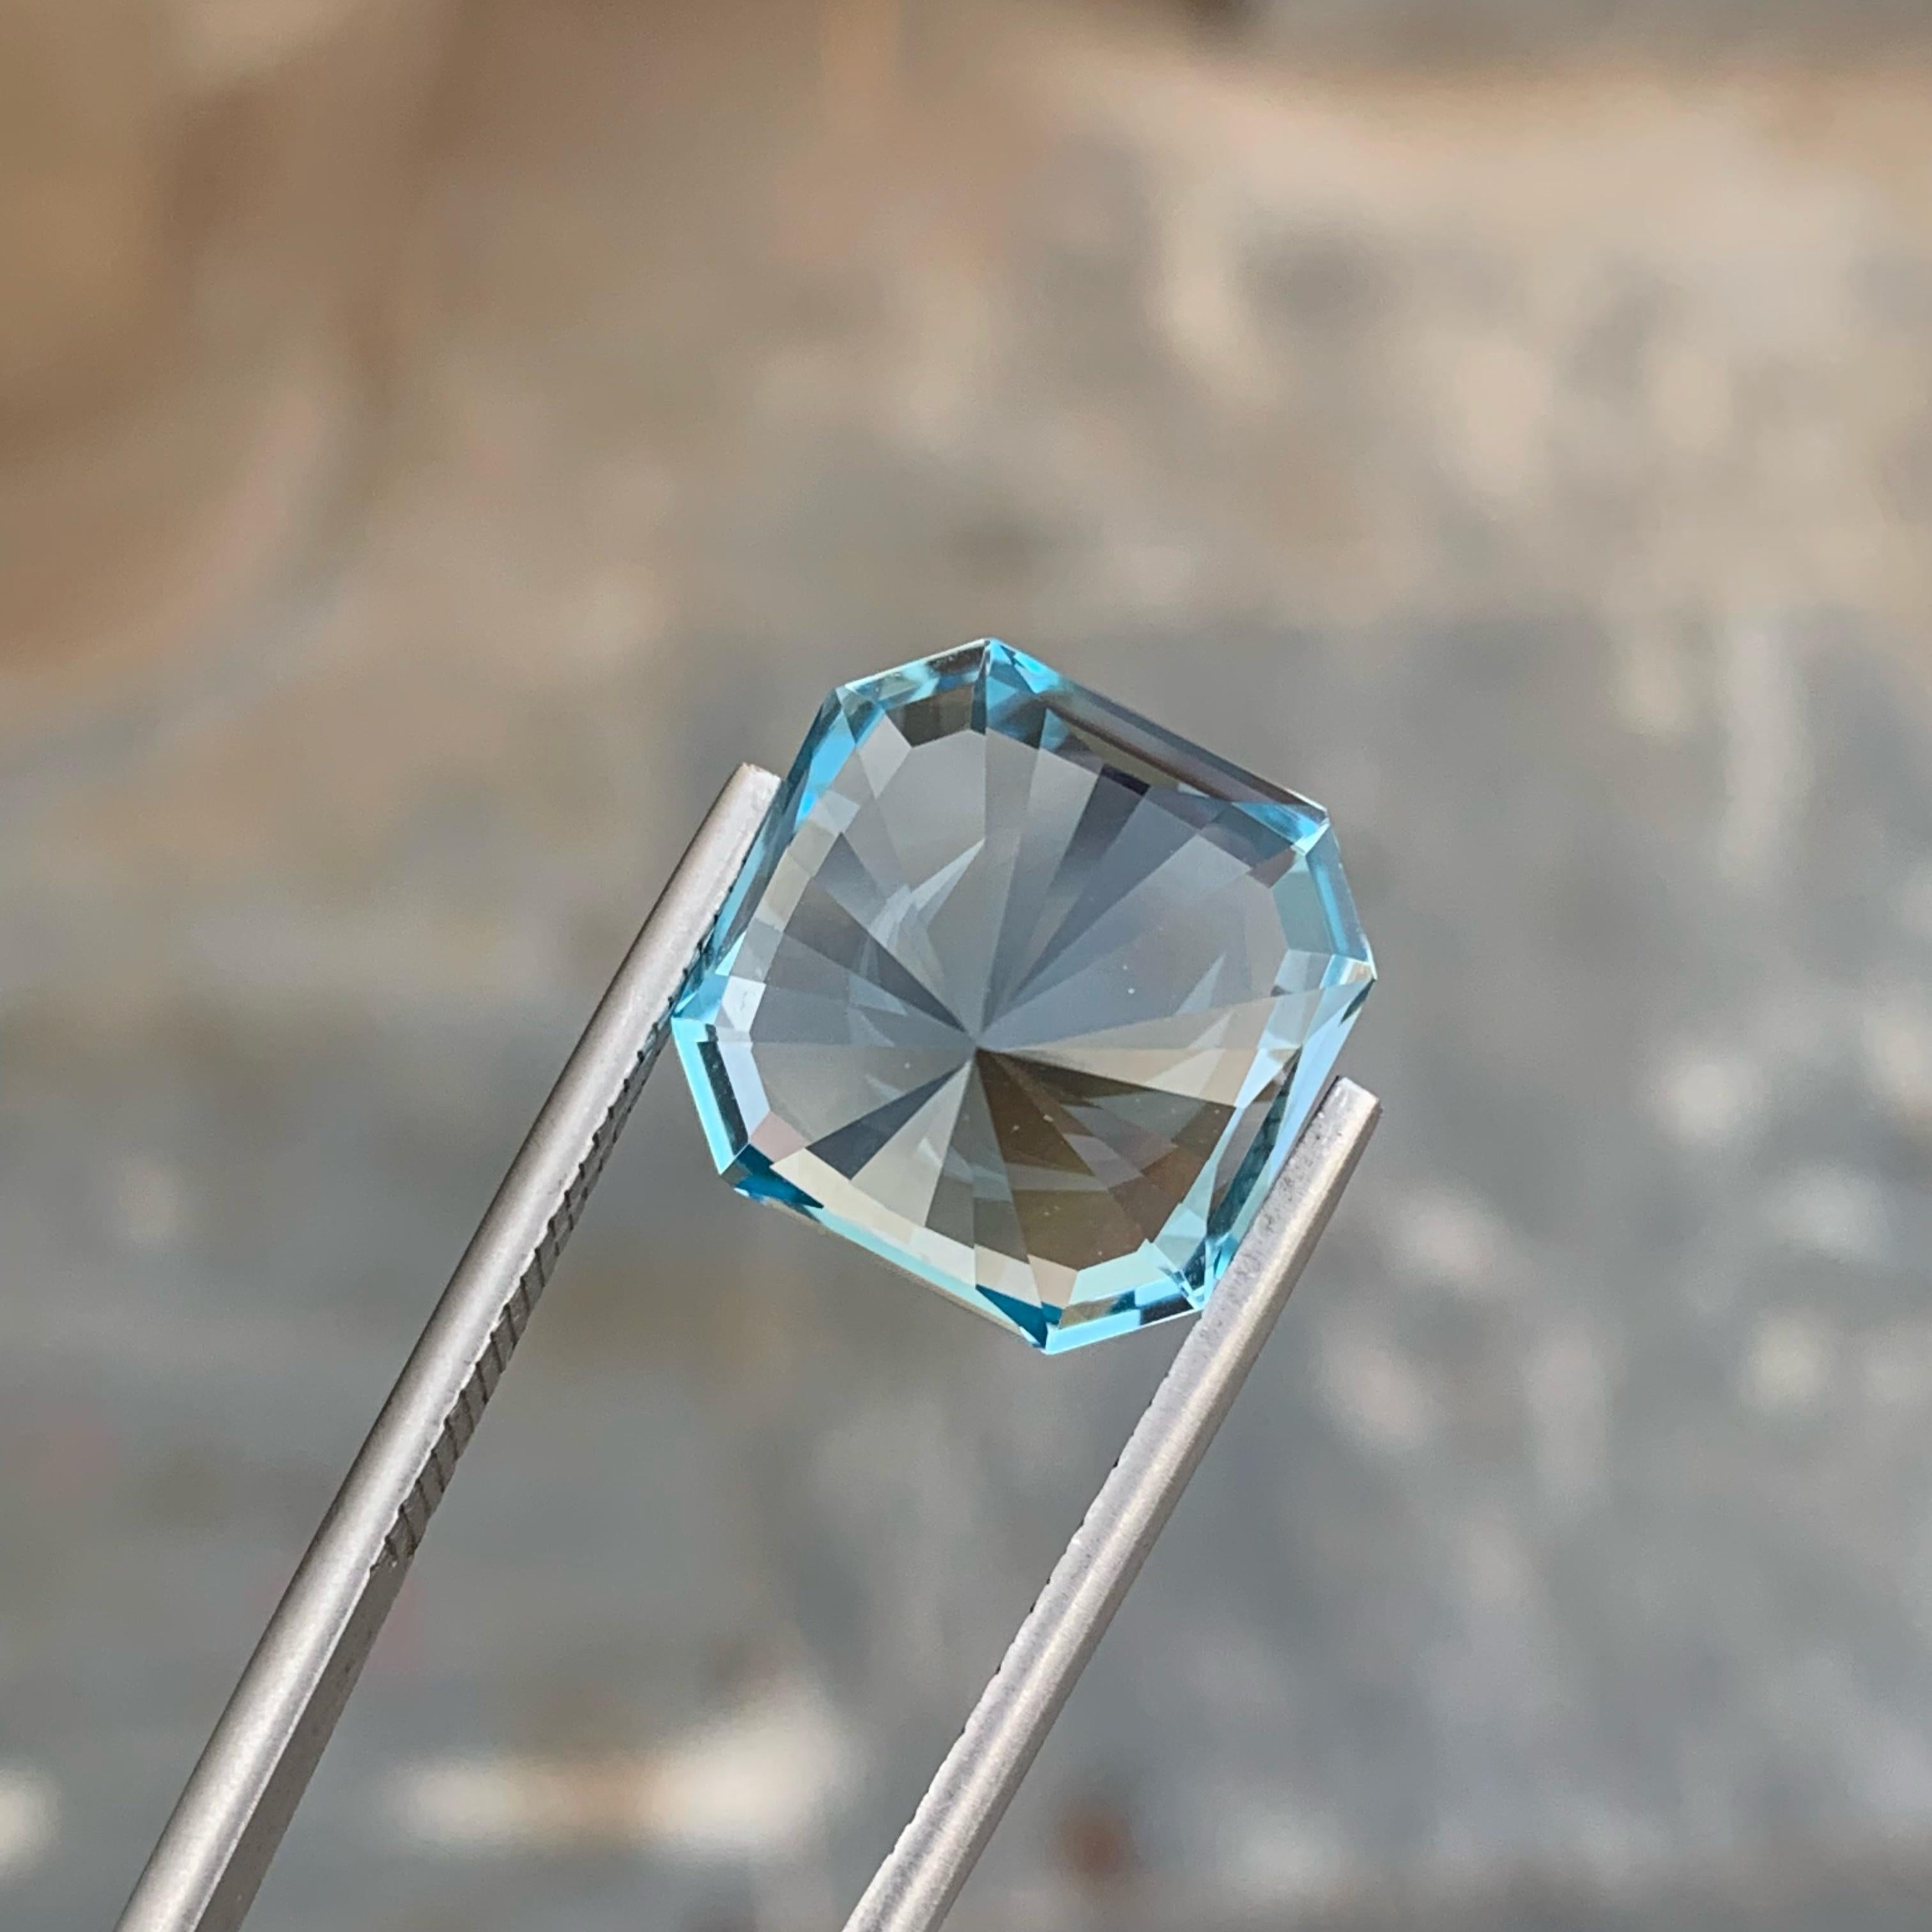 Weight 15.65 carats 
Dimensions 14.2 x 14.2 x 9.7 mm
Treatment Heated 
Clarity VVS (Very, Very Slightly Included)
Origin Madagascar
Shape Octagon 
Cut Asscher 




Elevate your jewelry collection with this exquisite Vivid Blue Topaz gemstone,